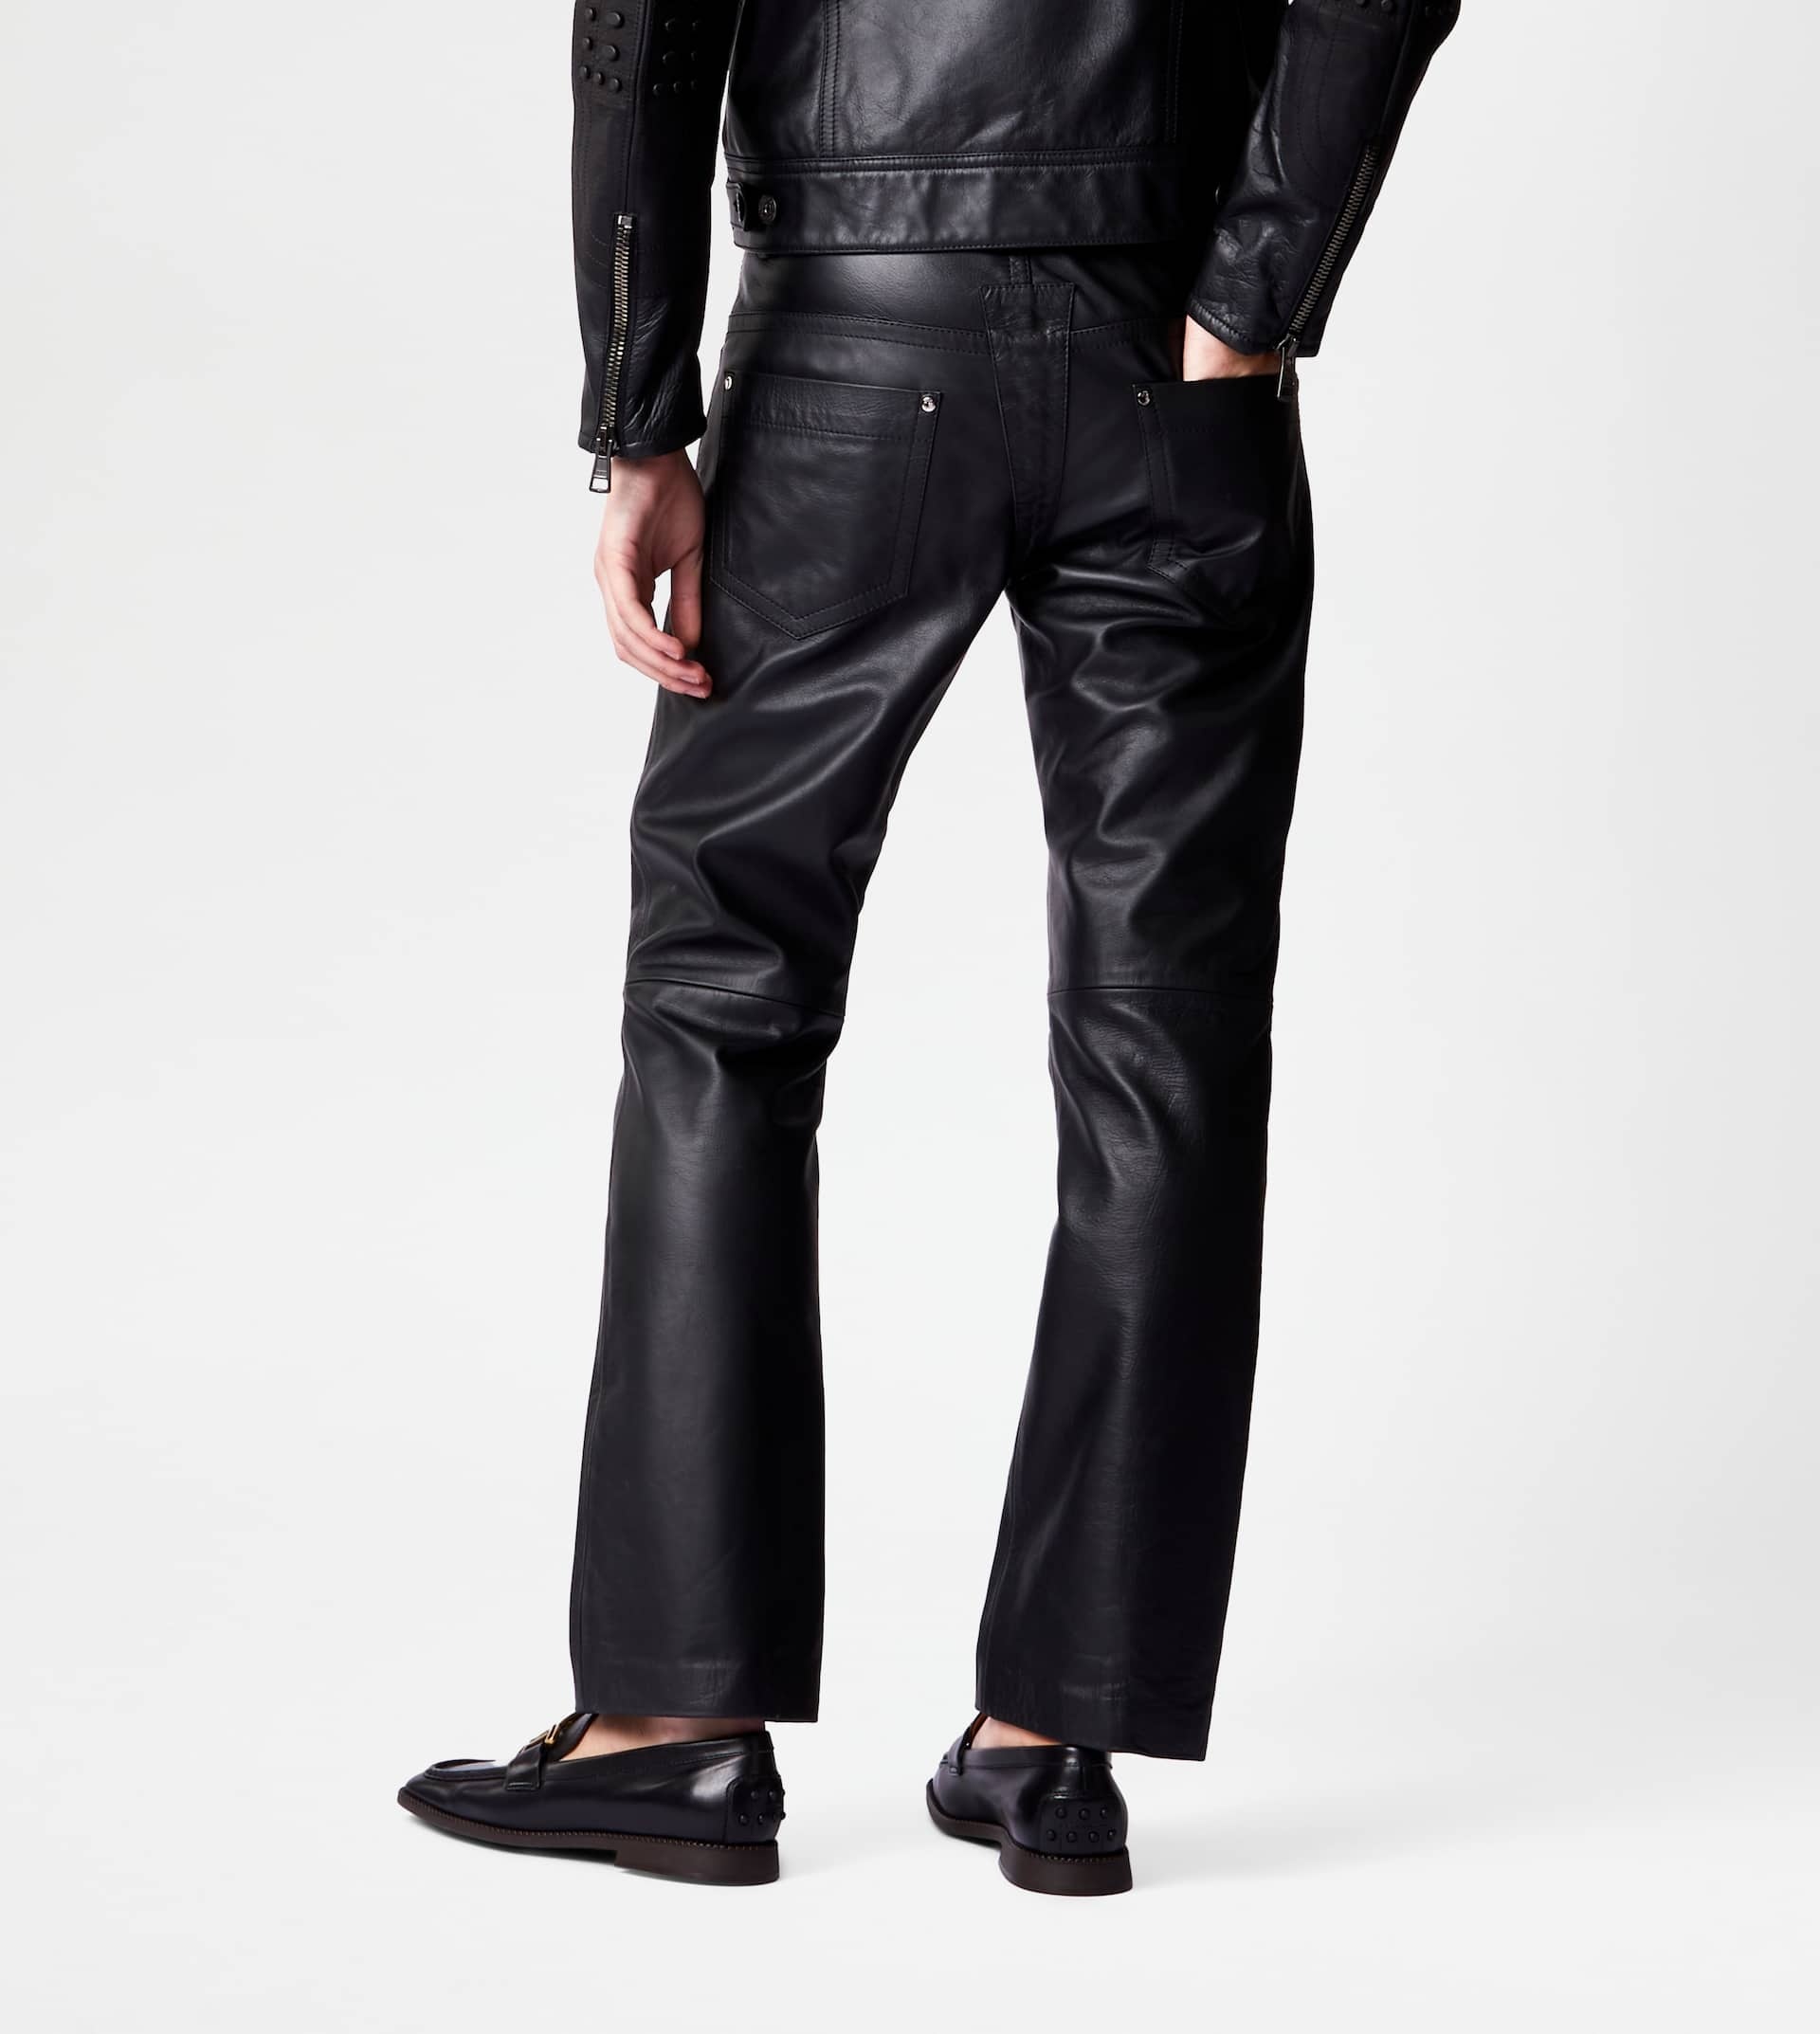 PANTS IN LEATHER - BLACK - 7